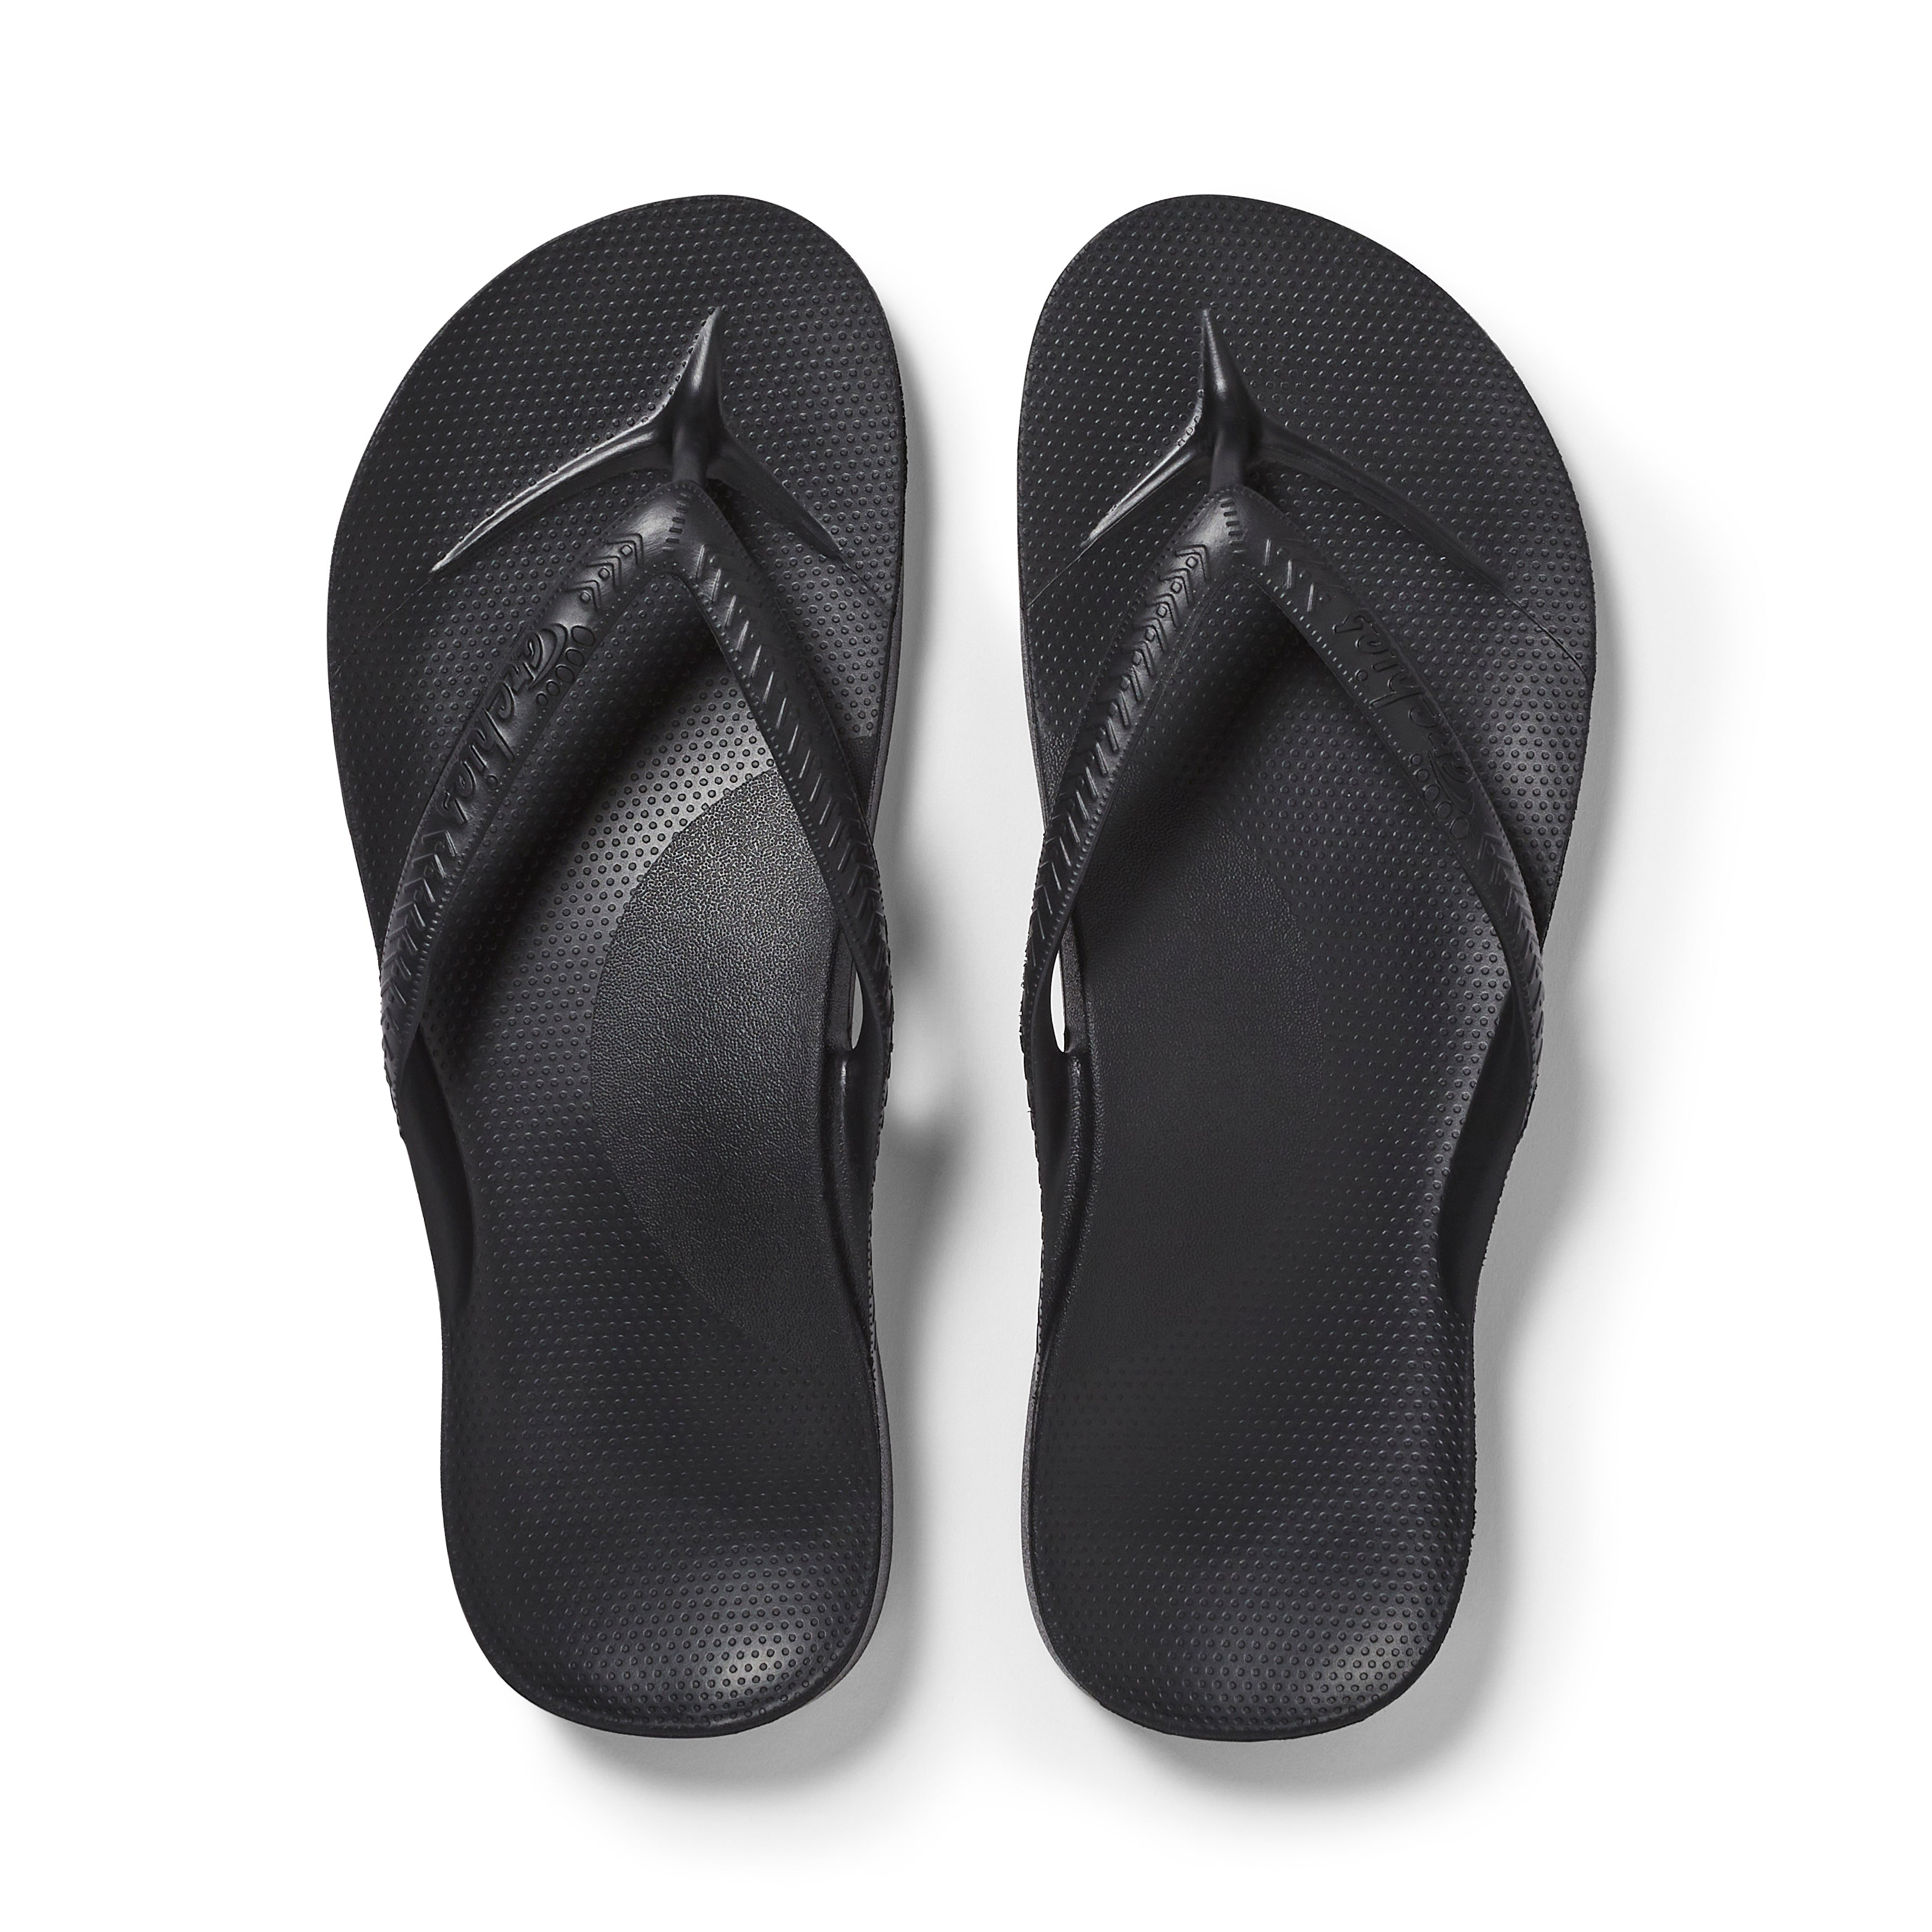 Did you know our brand new Archies Slides have the same arch support as  your favourite Archies Flip Flops!? 😱😊